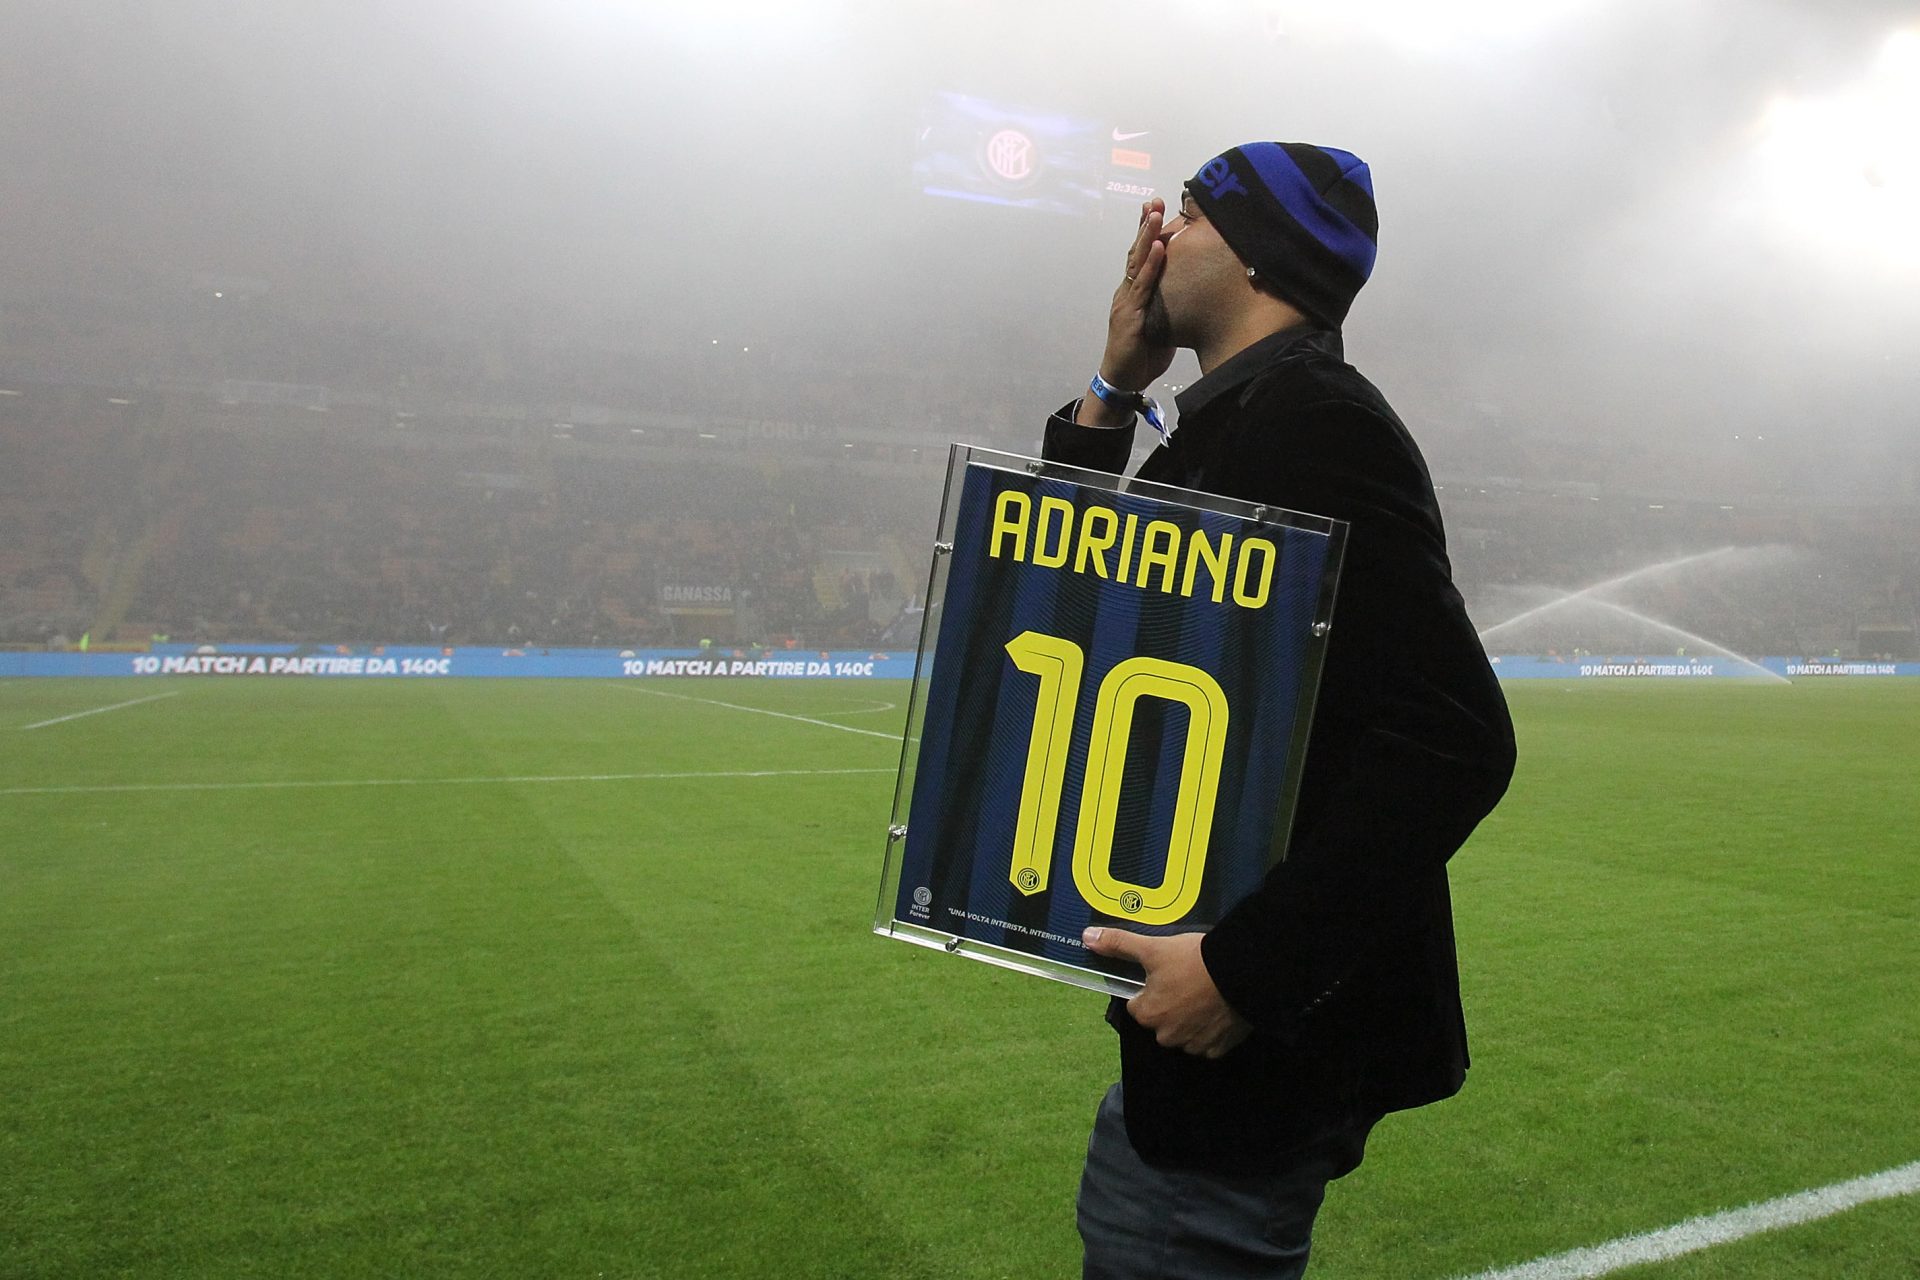 <p><span>As the seasons pass, Adriano's performance deteriorates, as does his lifestyle. In 2009, Inter Milan finally decided to terminate its contract with the club, thus ending his Italian adventure.</span></p>